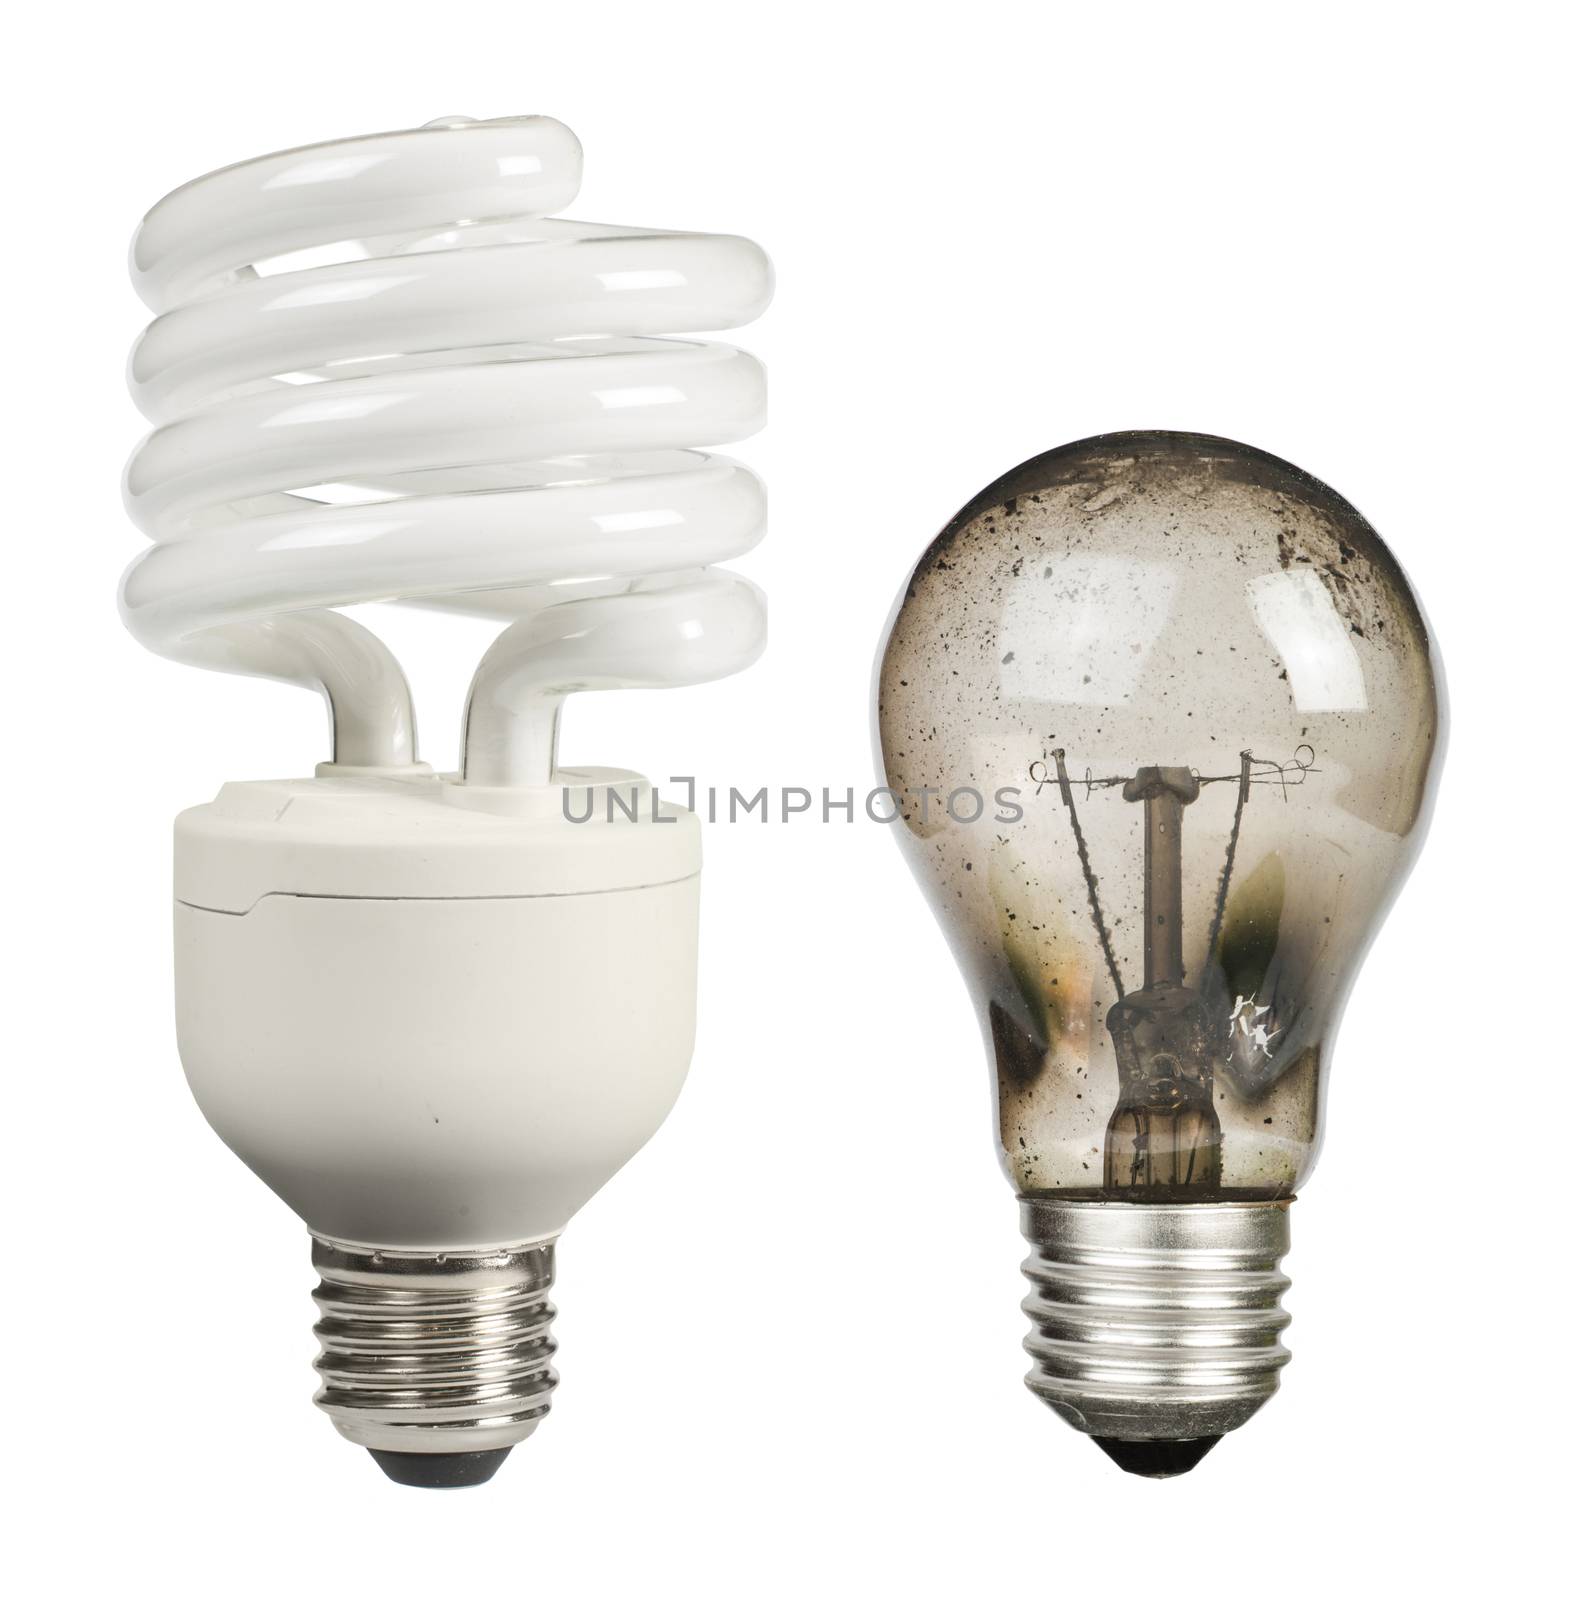 Ecological economical lamp and old burned lamp on white background.